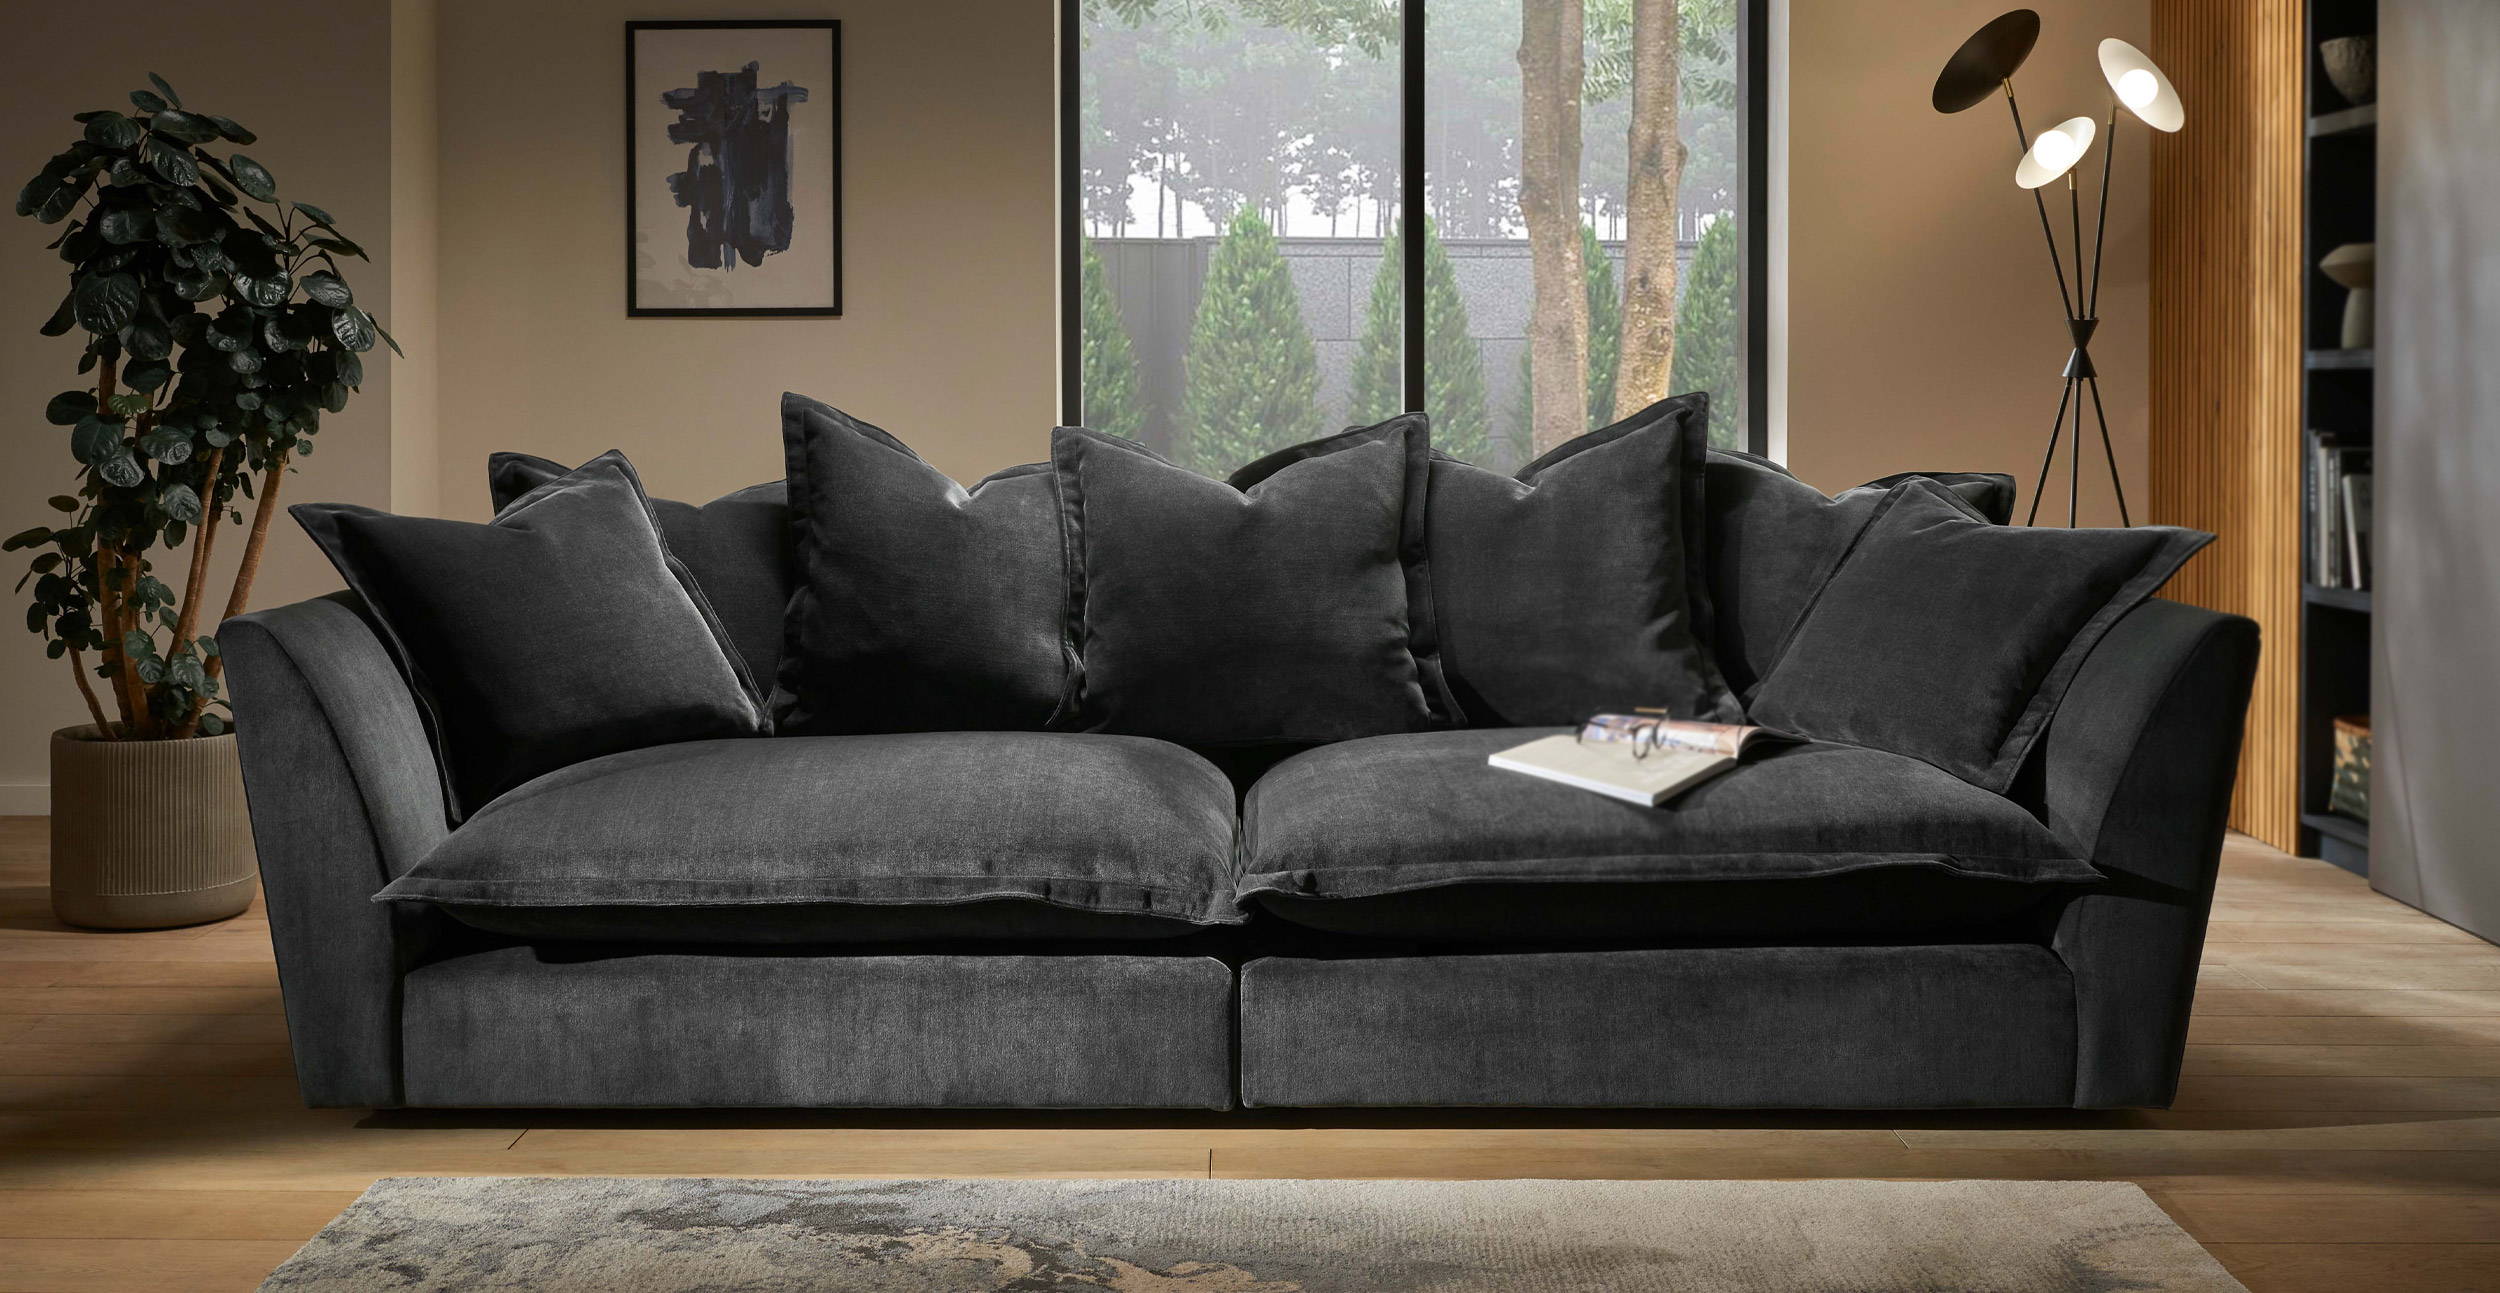 Cosmo Sofa Range At BF Home - High Comfort Levels With A Relaxed Look